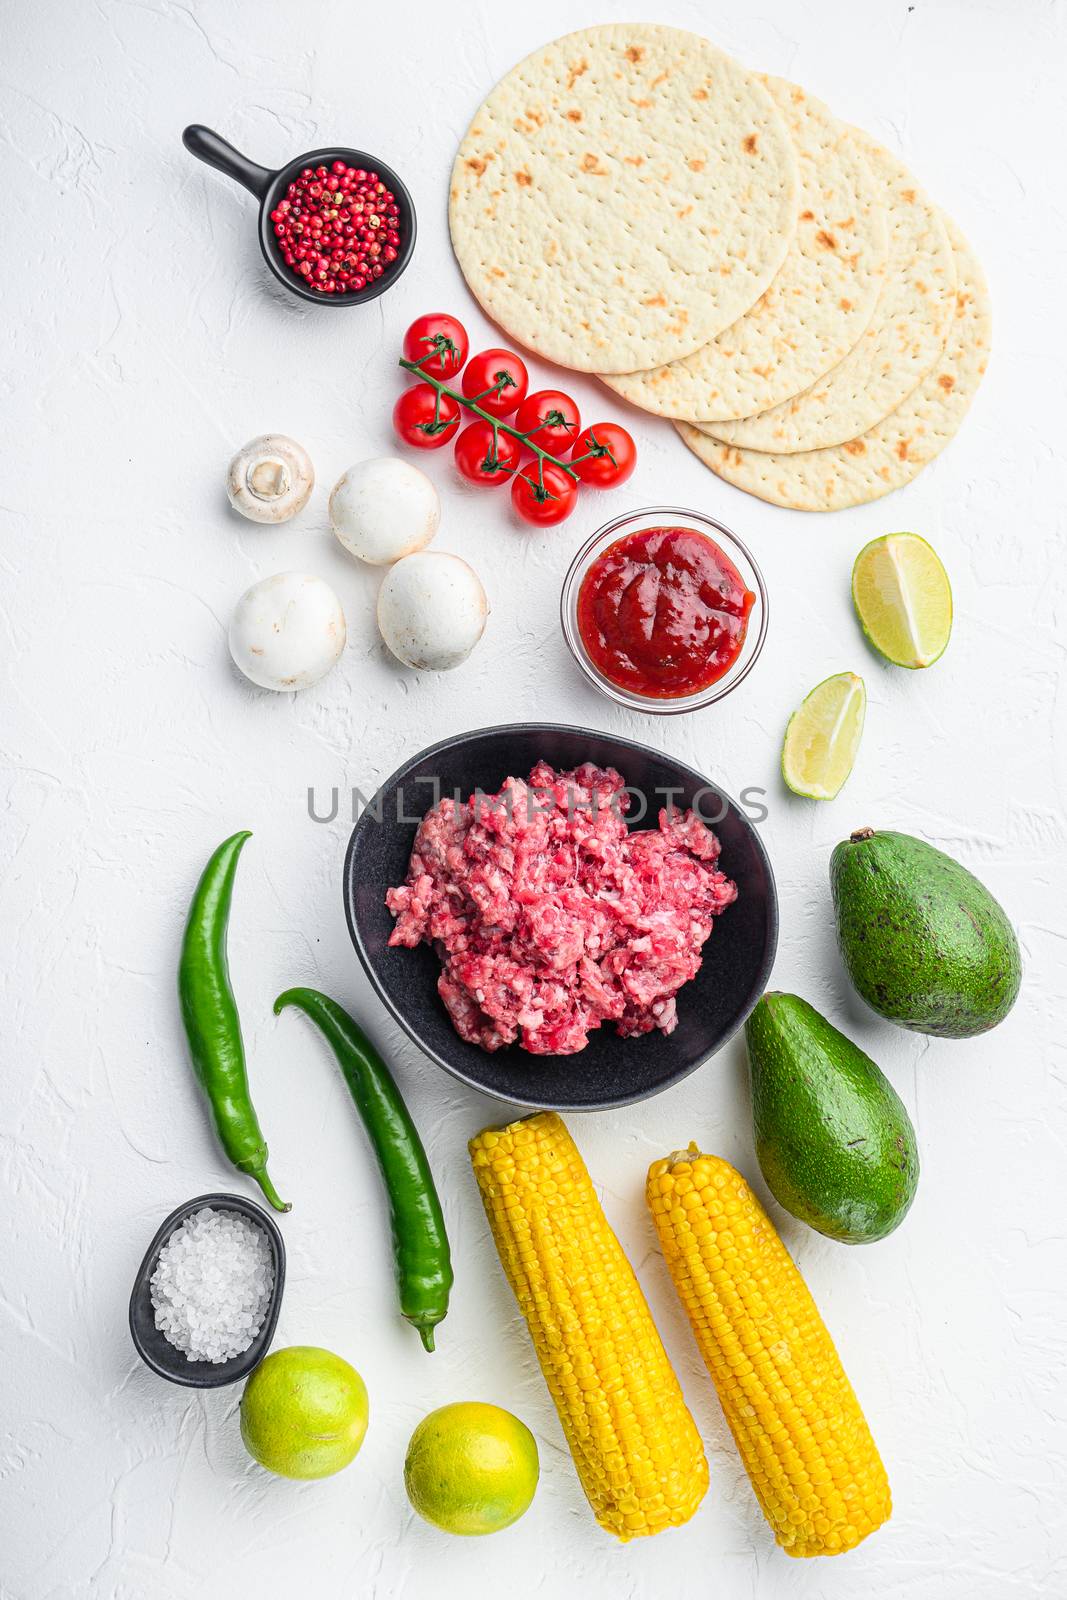 Taco ingredients homemade authentic mexican beef meal, over white concrete background top view